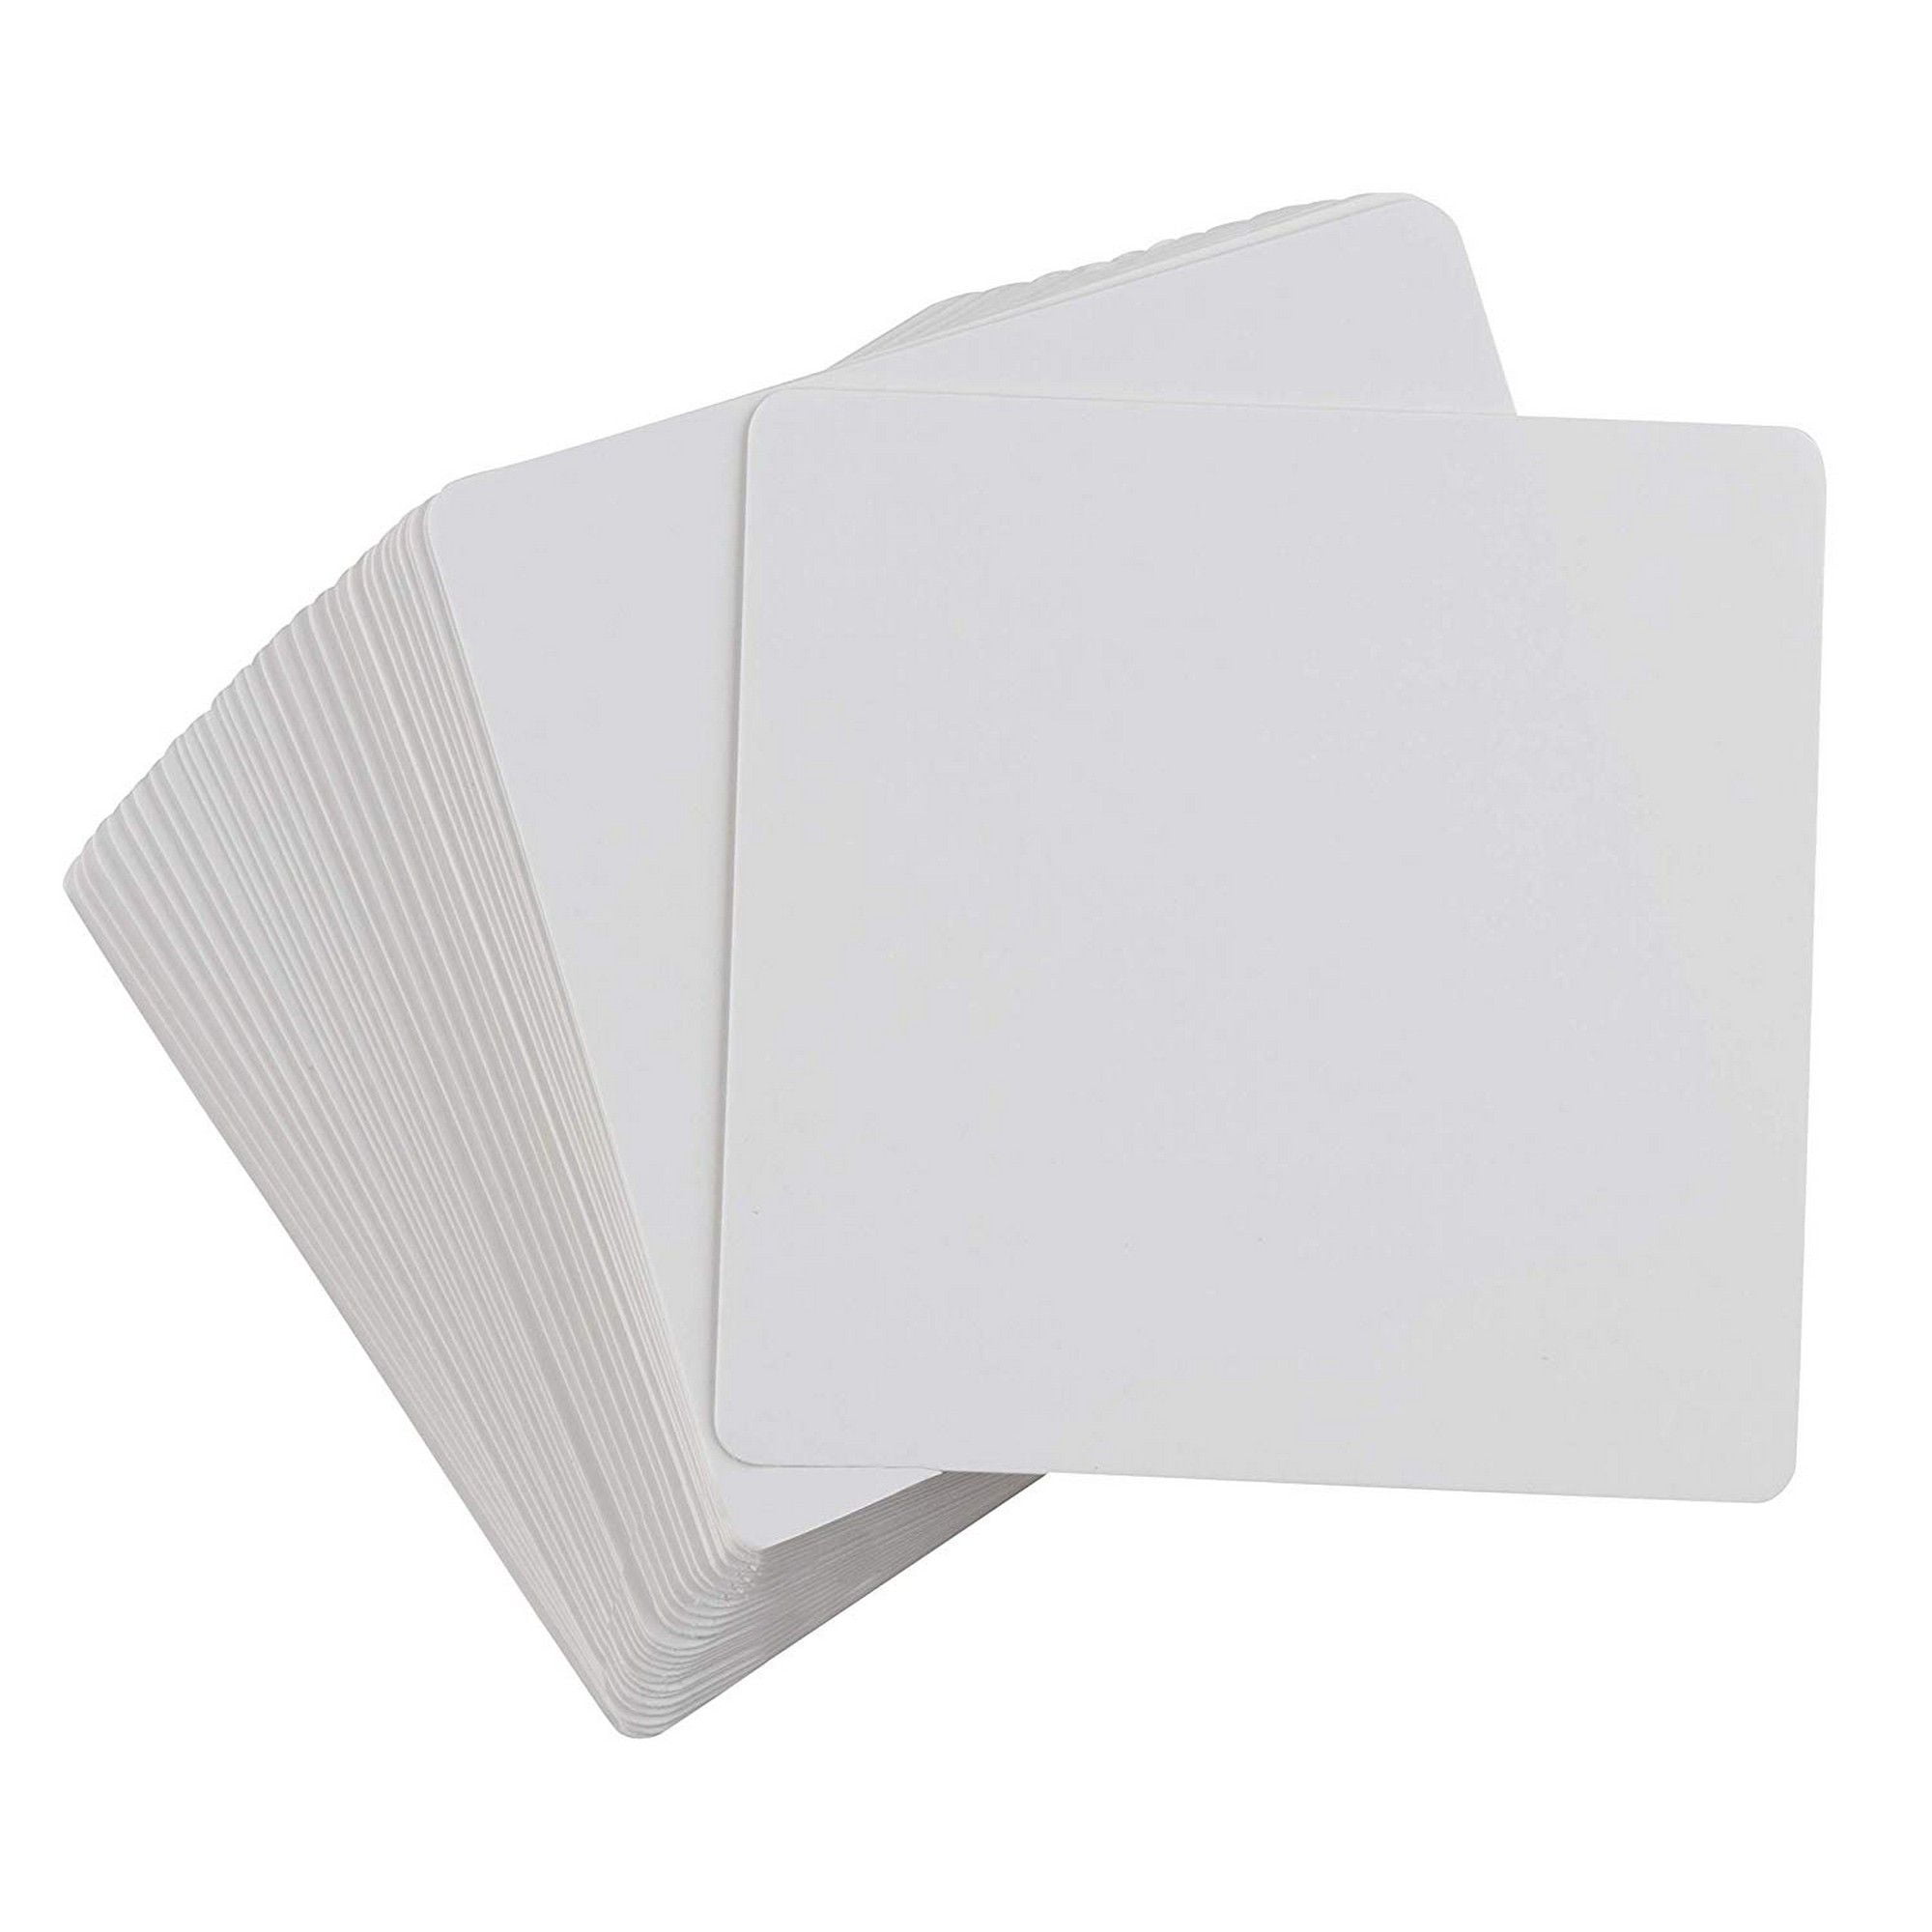 Everygo 100Pcs Blank Dry Erase Index Cards Blank Note Card Playing Card Hard Resuable Card Paper DIY Board Game Laminate Finish Perfect for Use with Dry Erase Markers